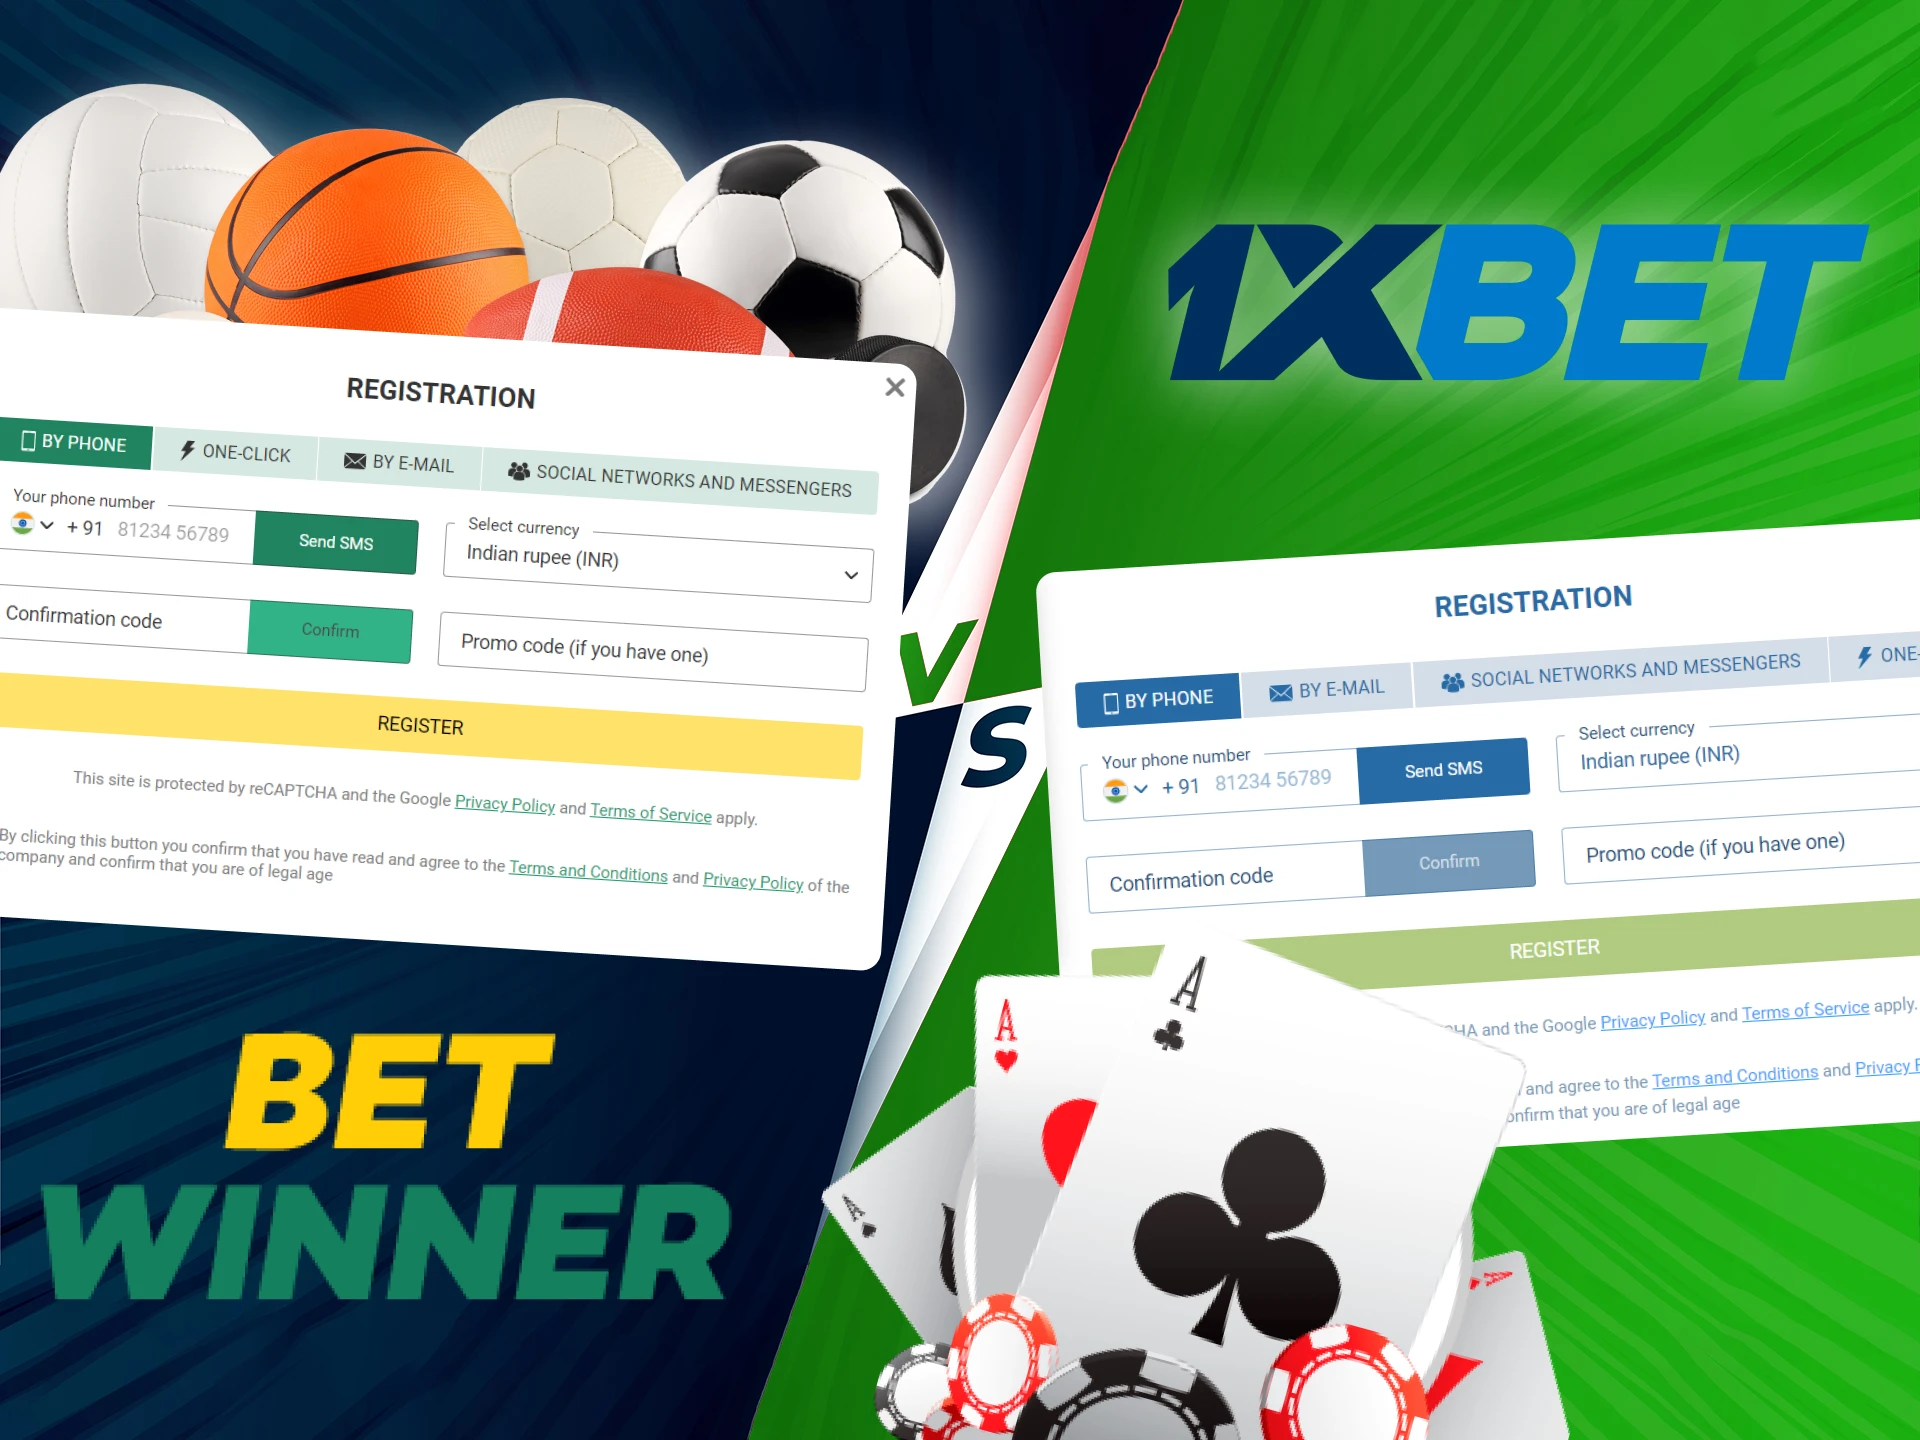 Register quickly and easily with 1xbet or Betwinner.